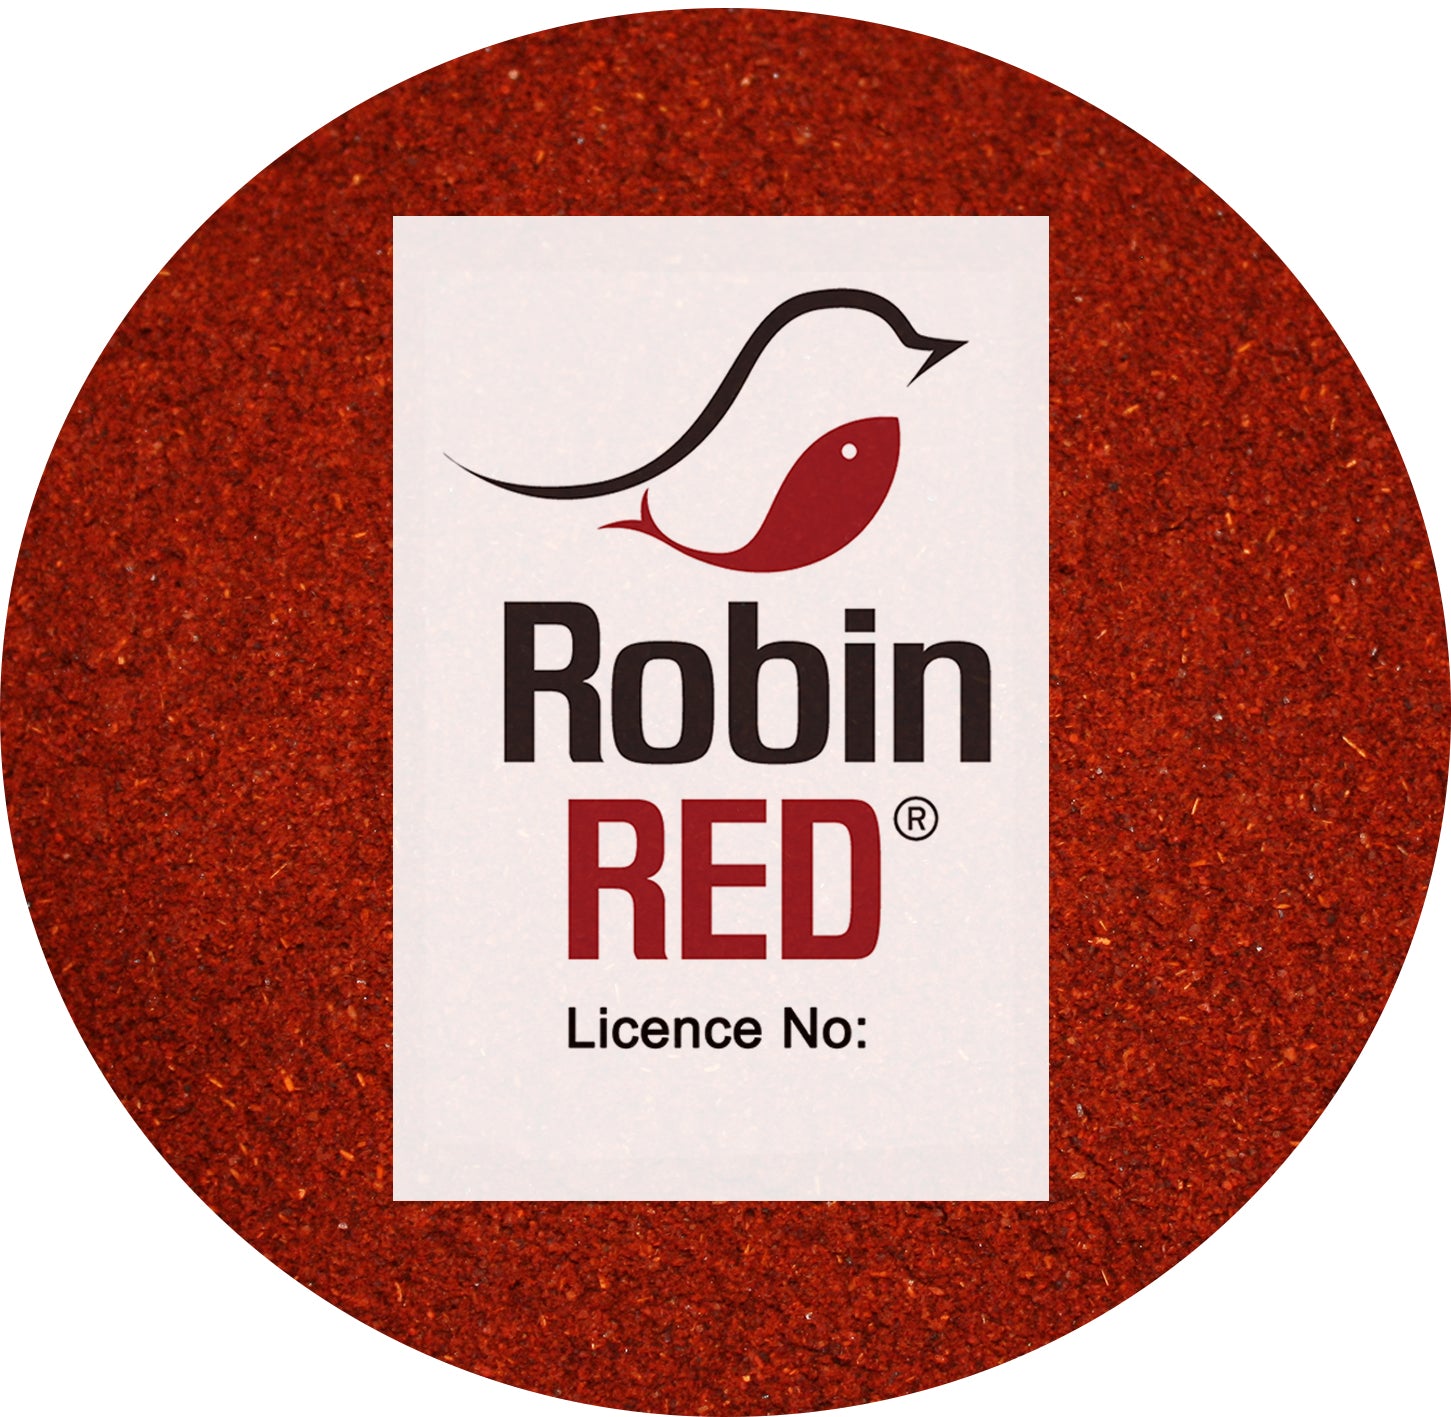 Robin Red logo and licence for UK and EU carp fishing bait firms and manufacturers